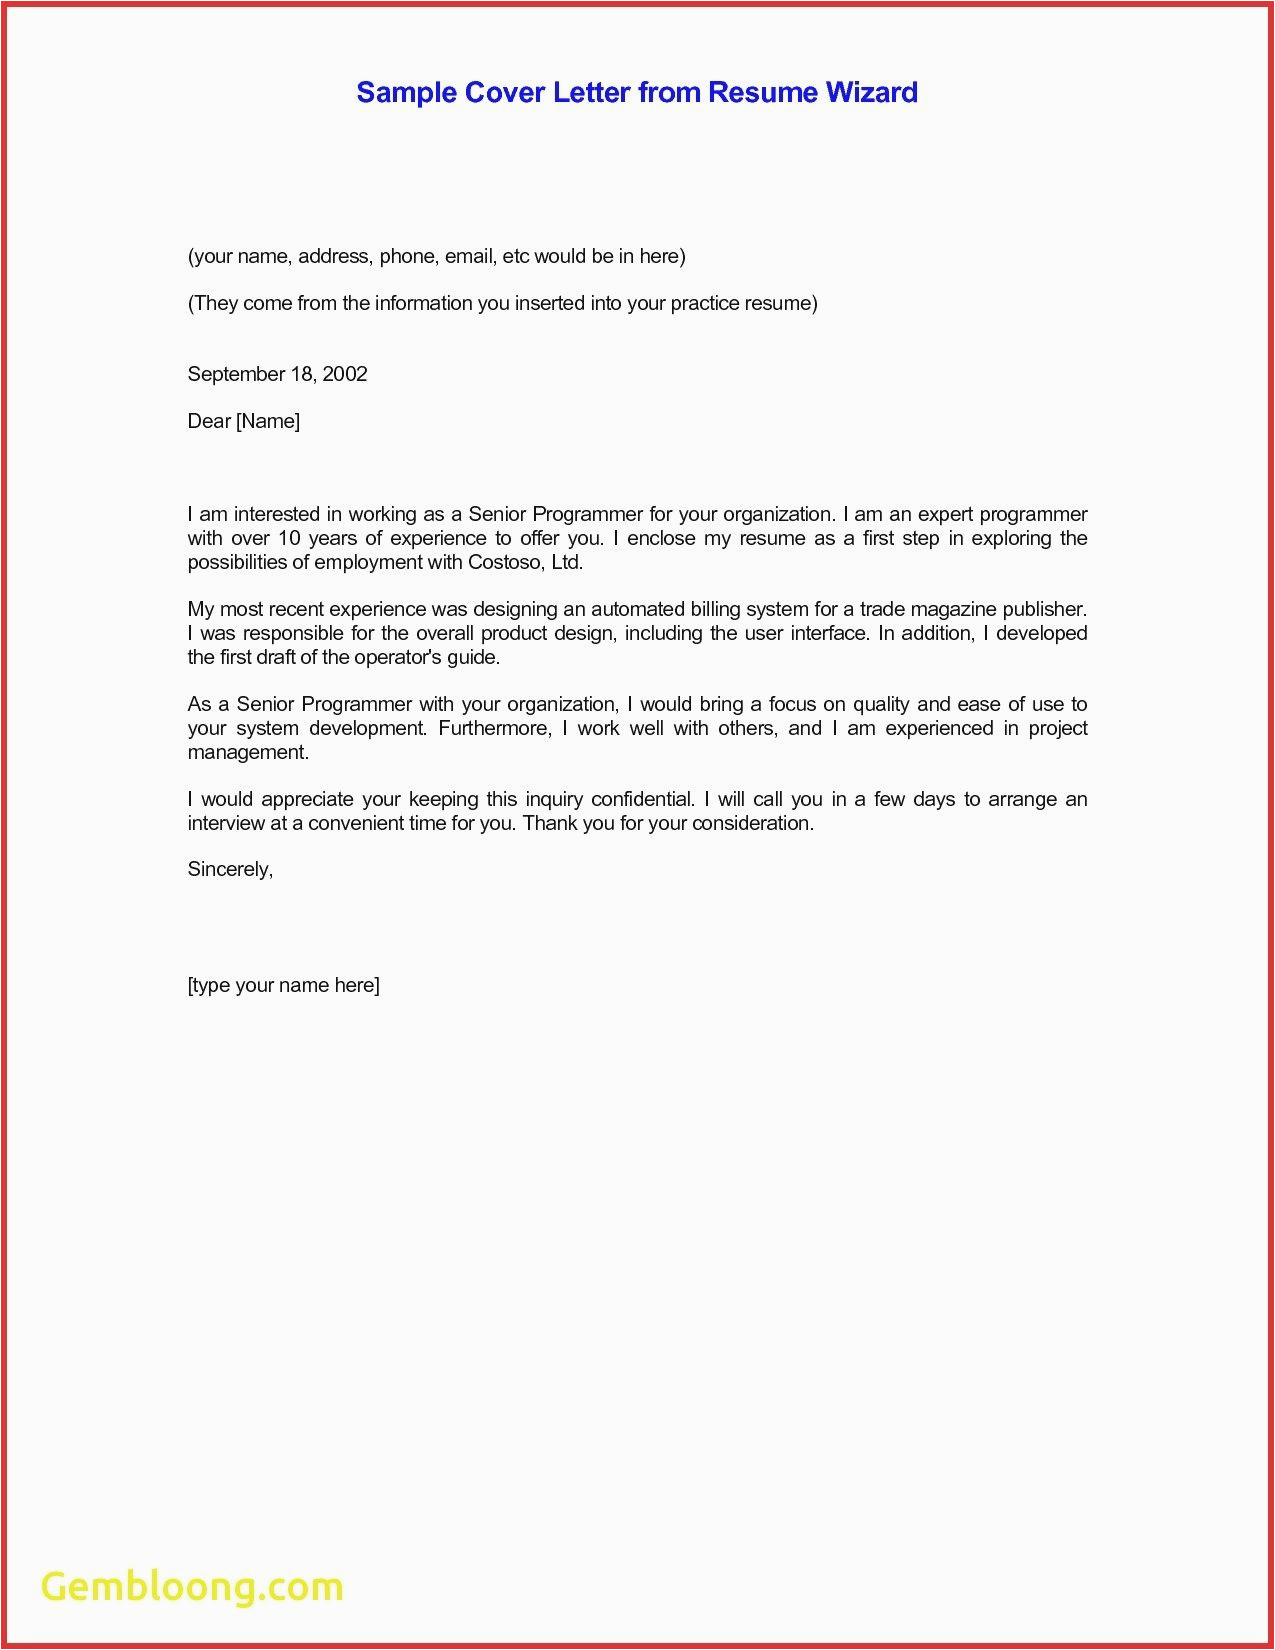 Email Sending Resume and Cover Letter Sample Email Cv Cover Letter Template